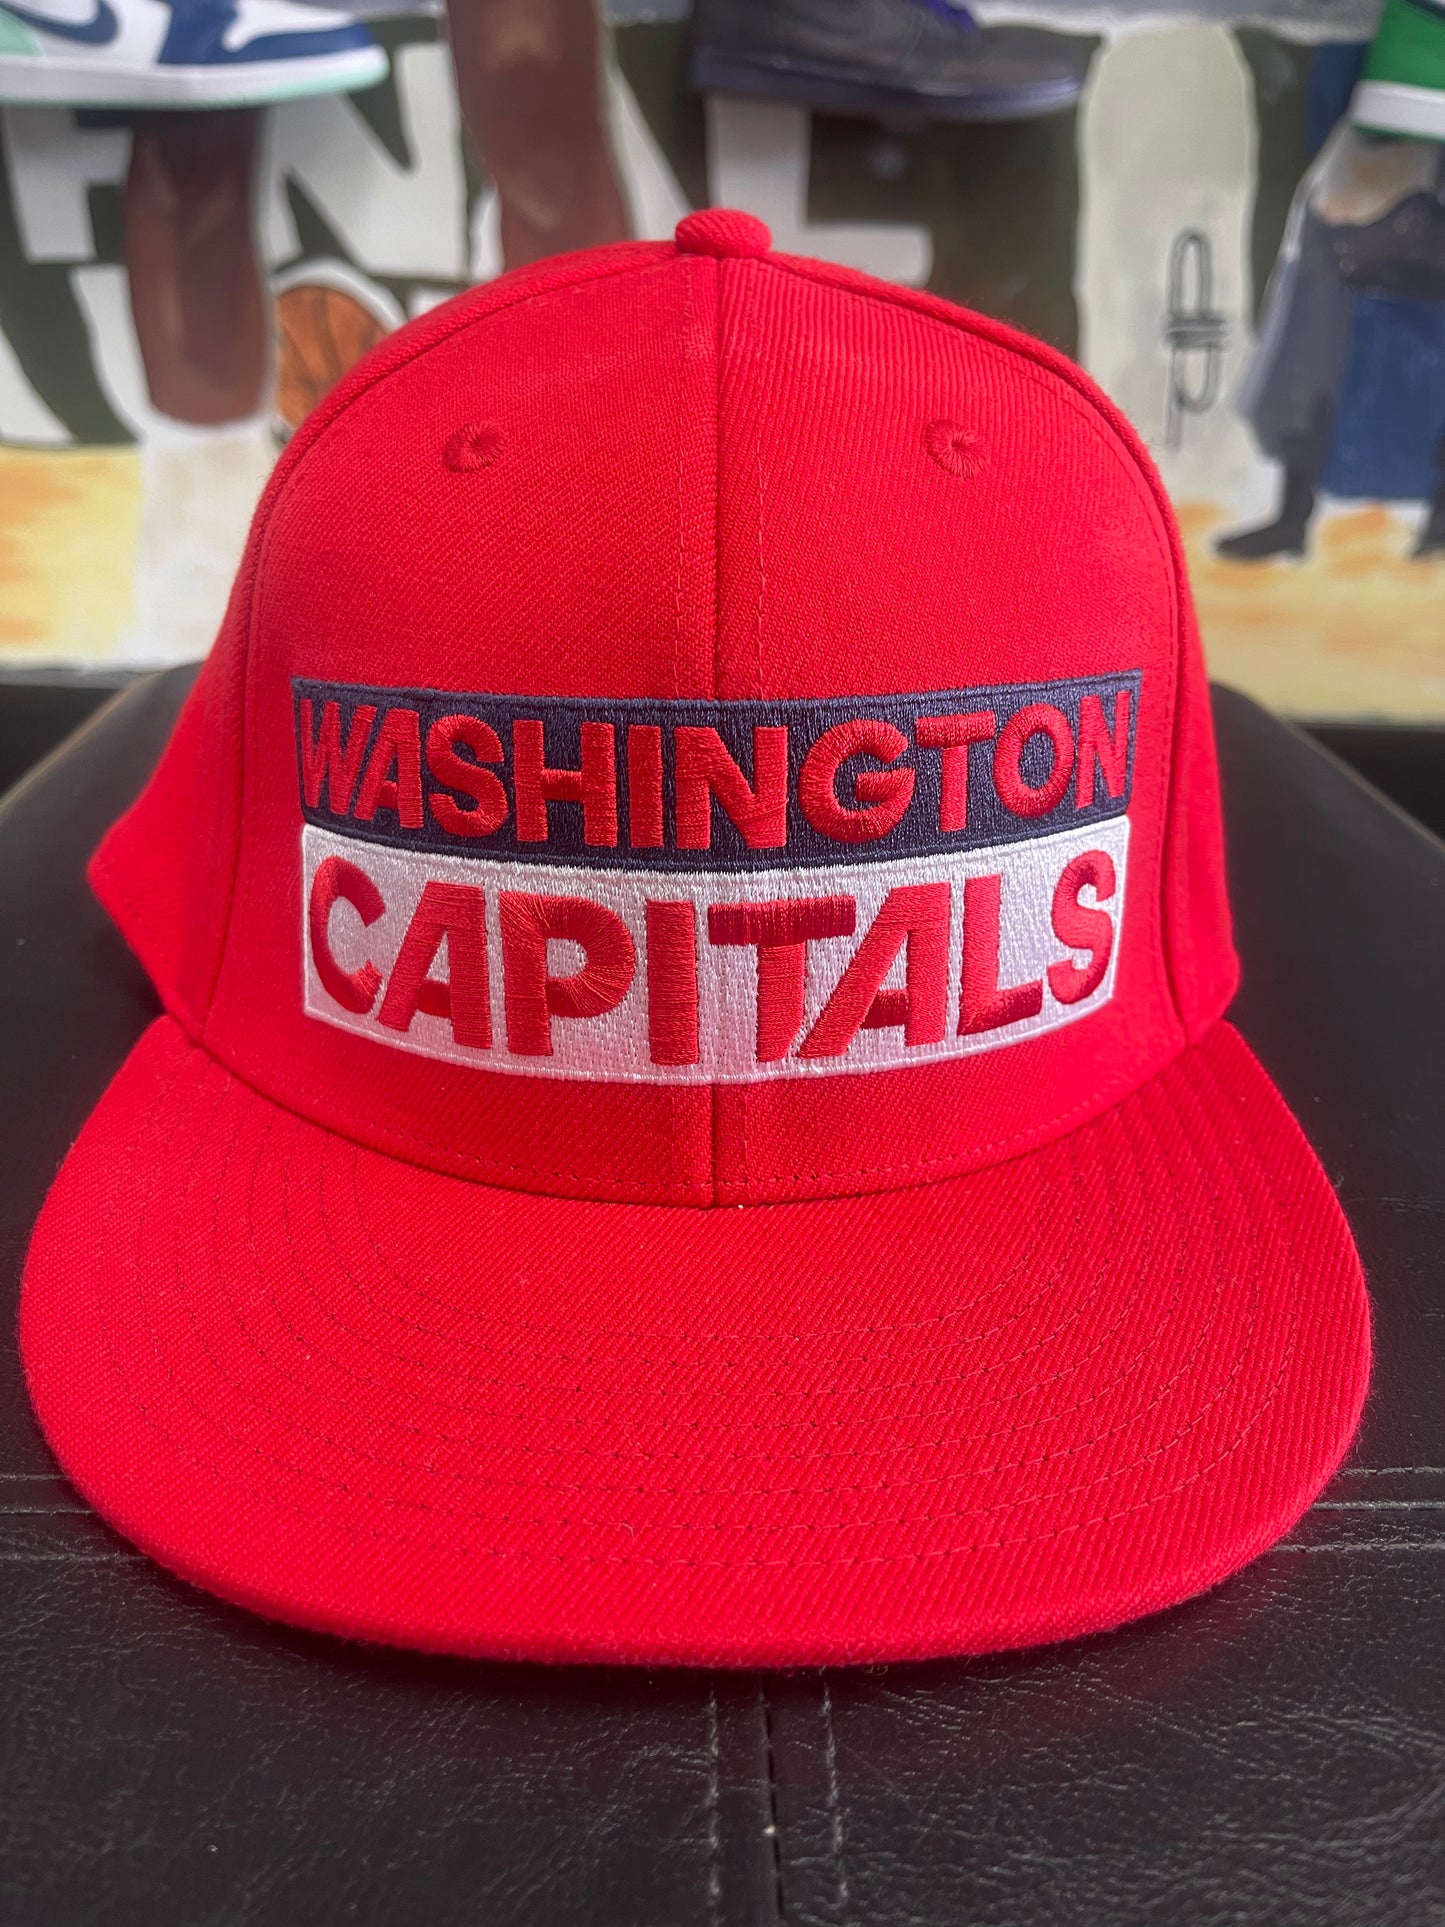 Washington Capitals fitted size L/XL